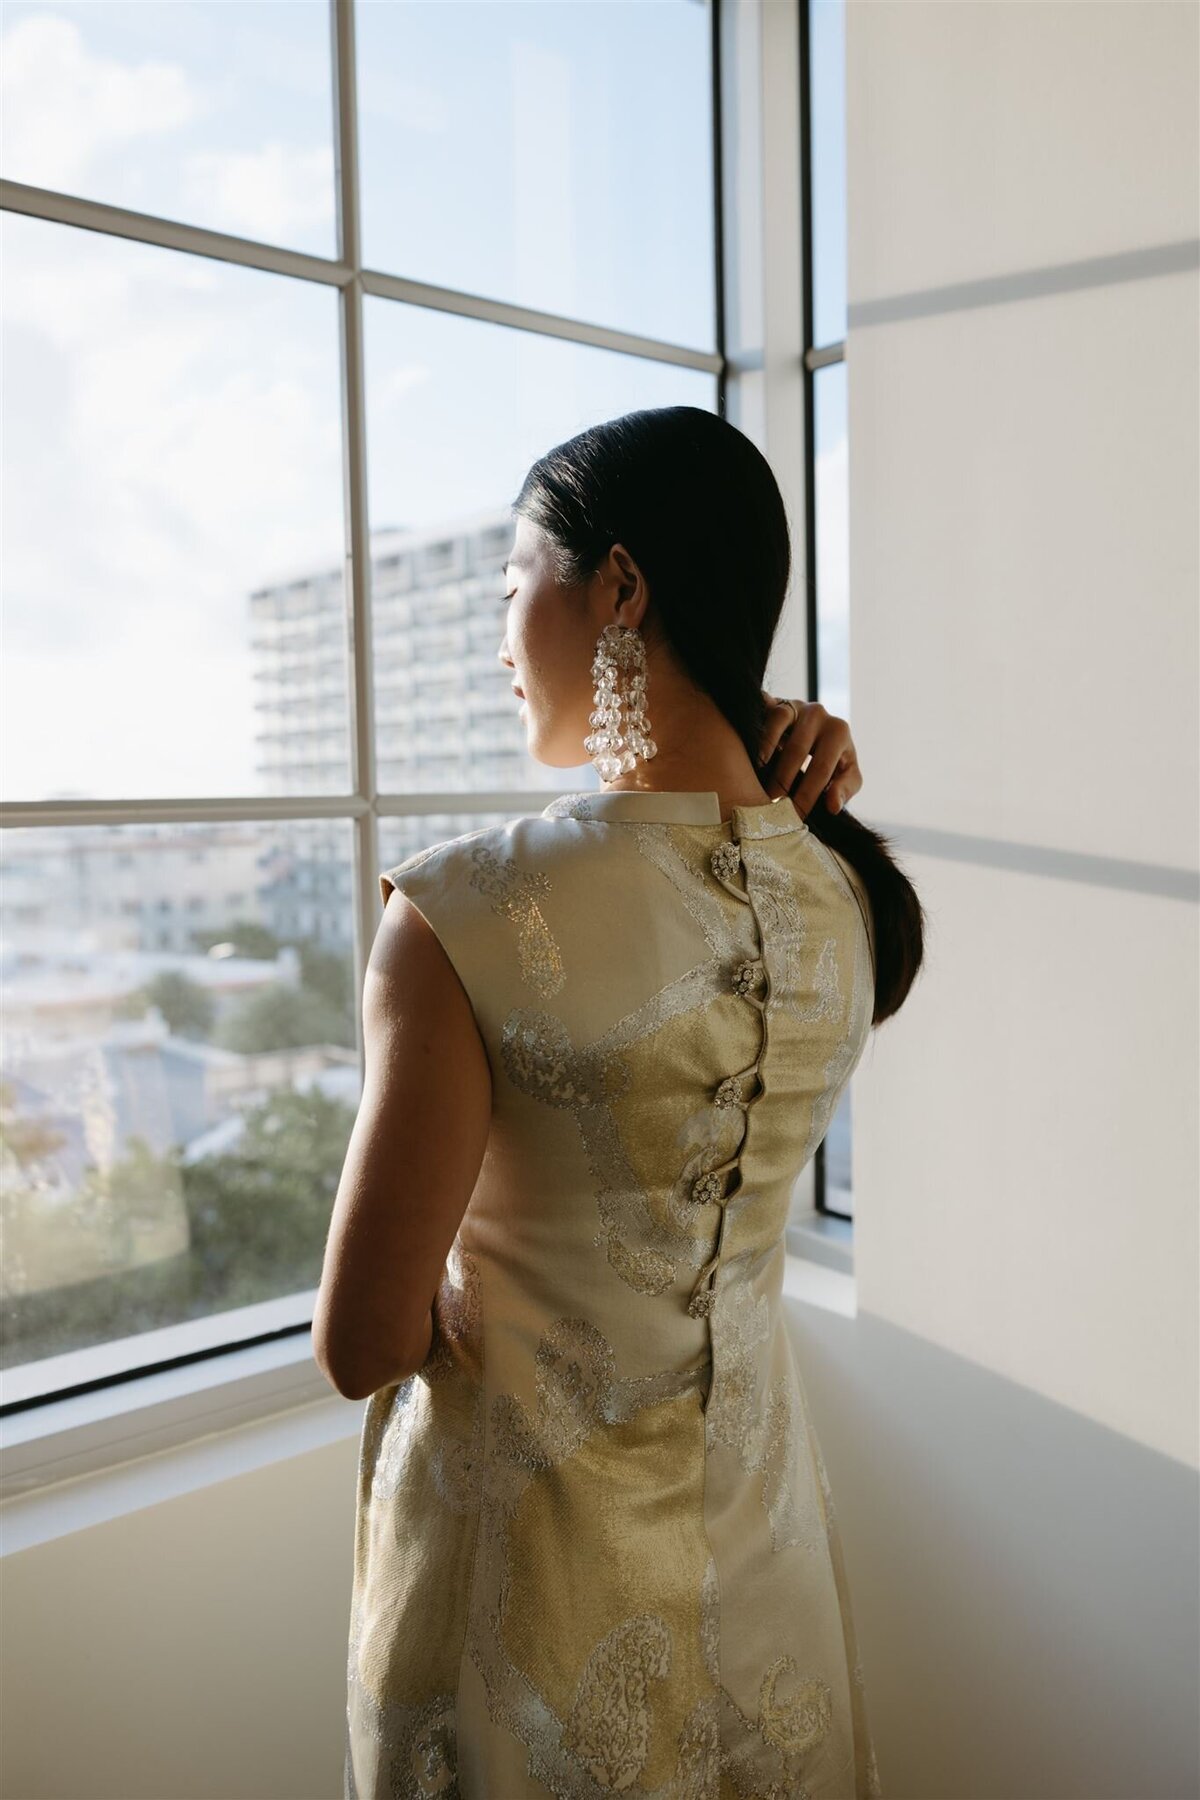 photos of bride when getting ready at wedding